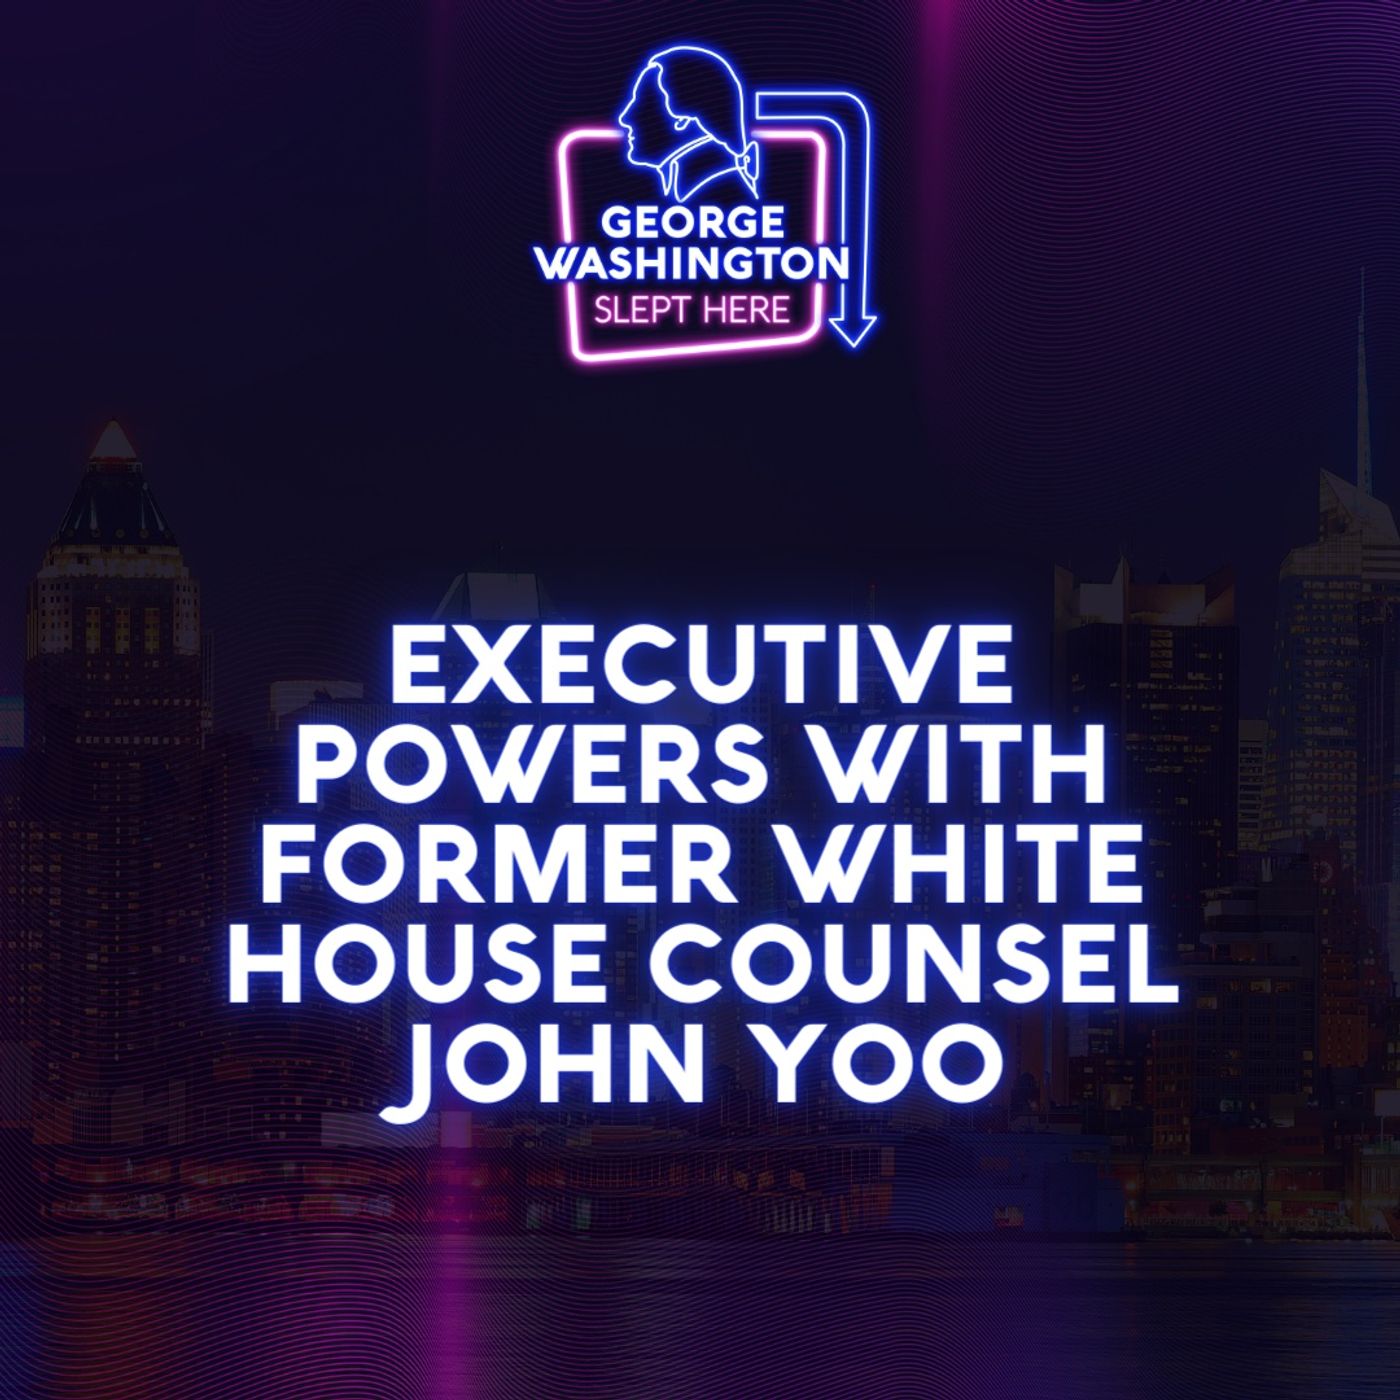 Executive Powers with former White House Counsel with John Yoo